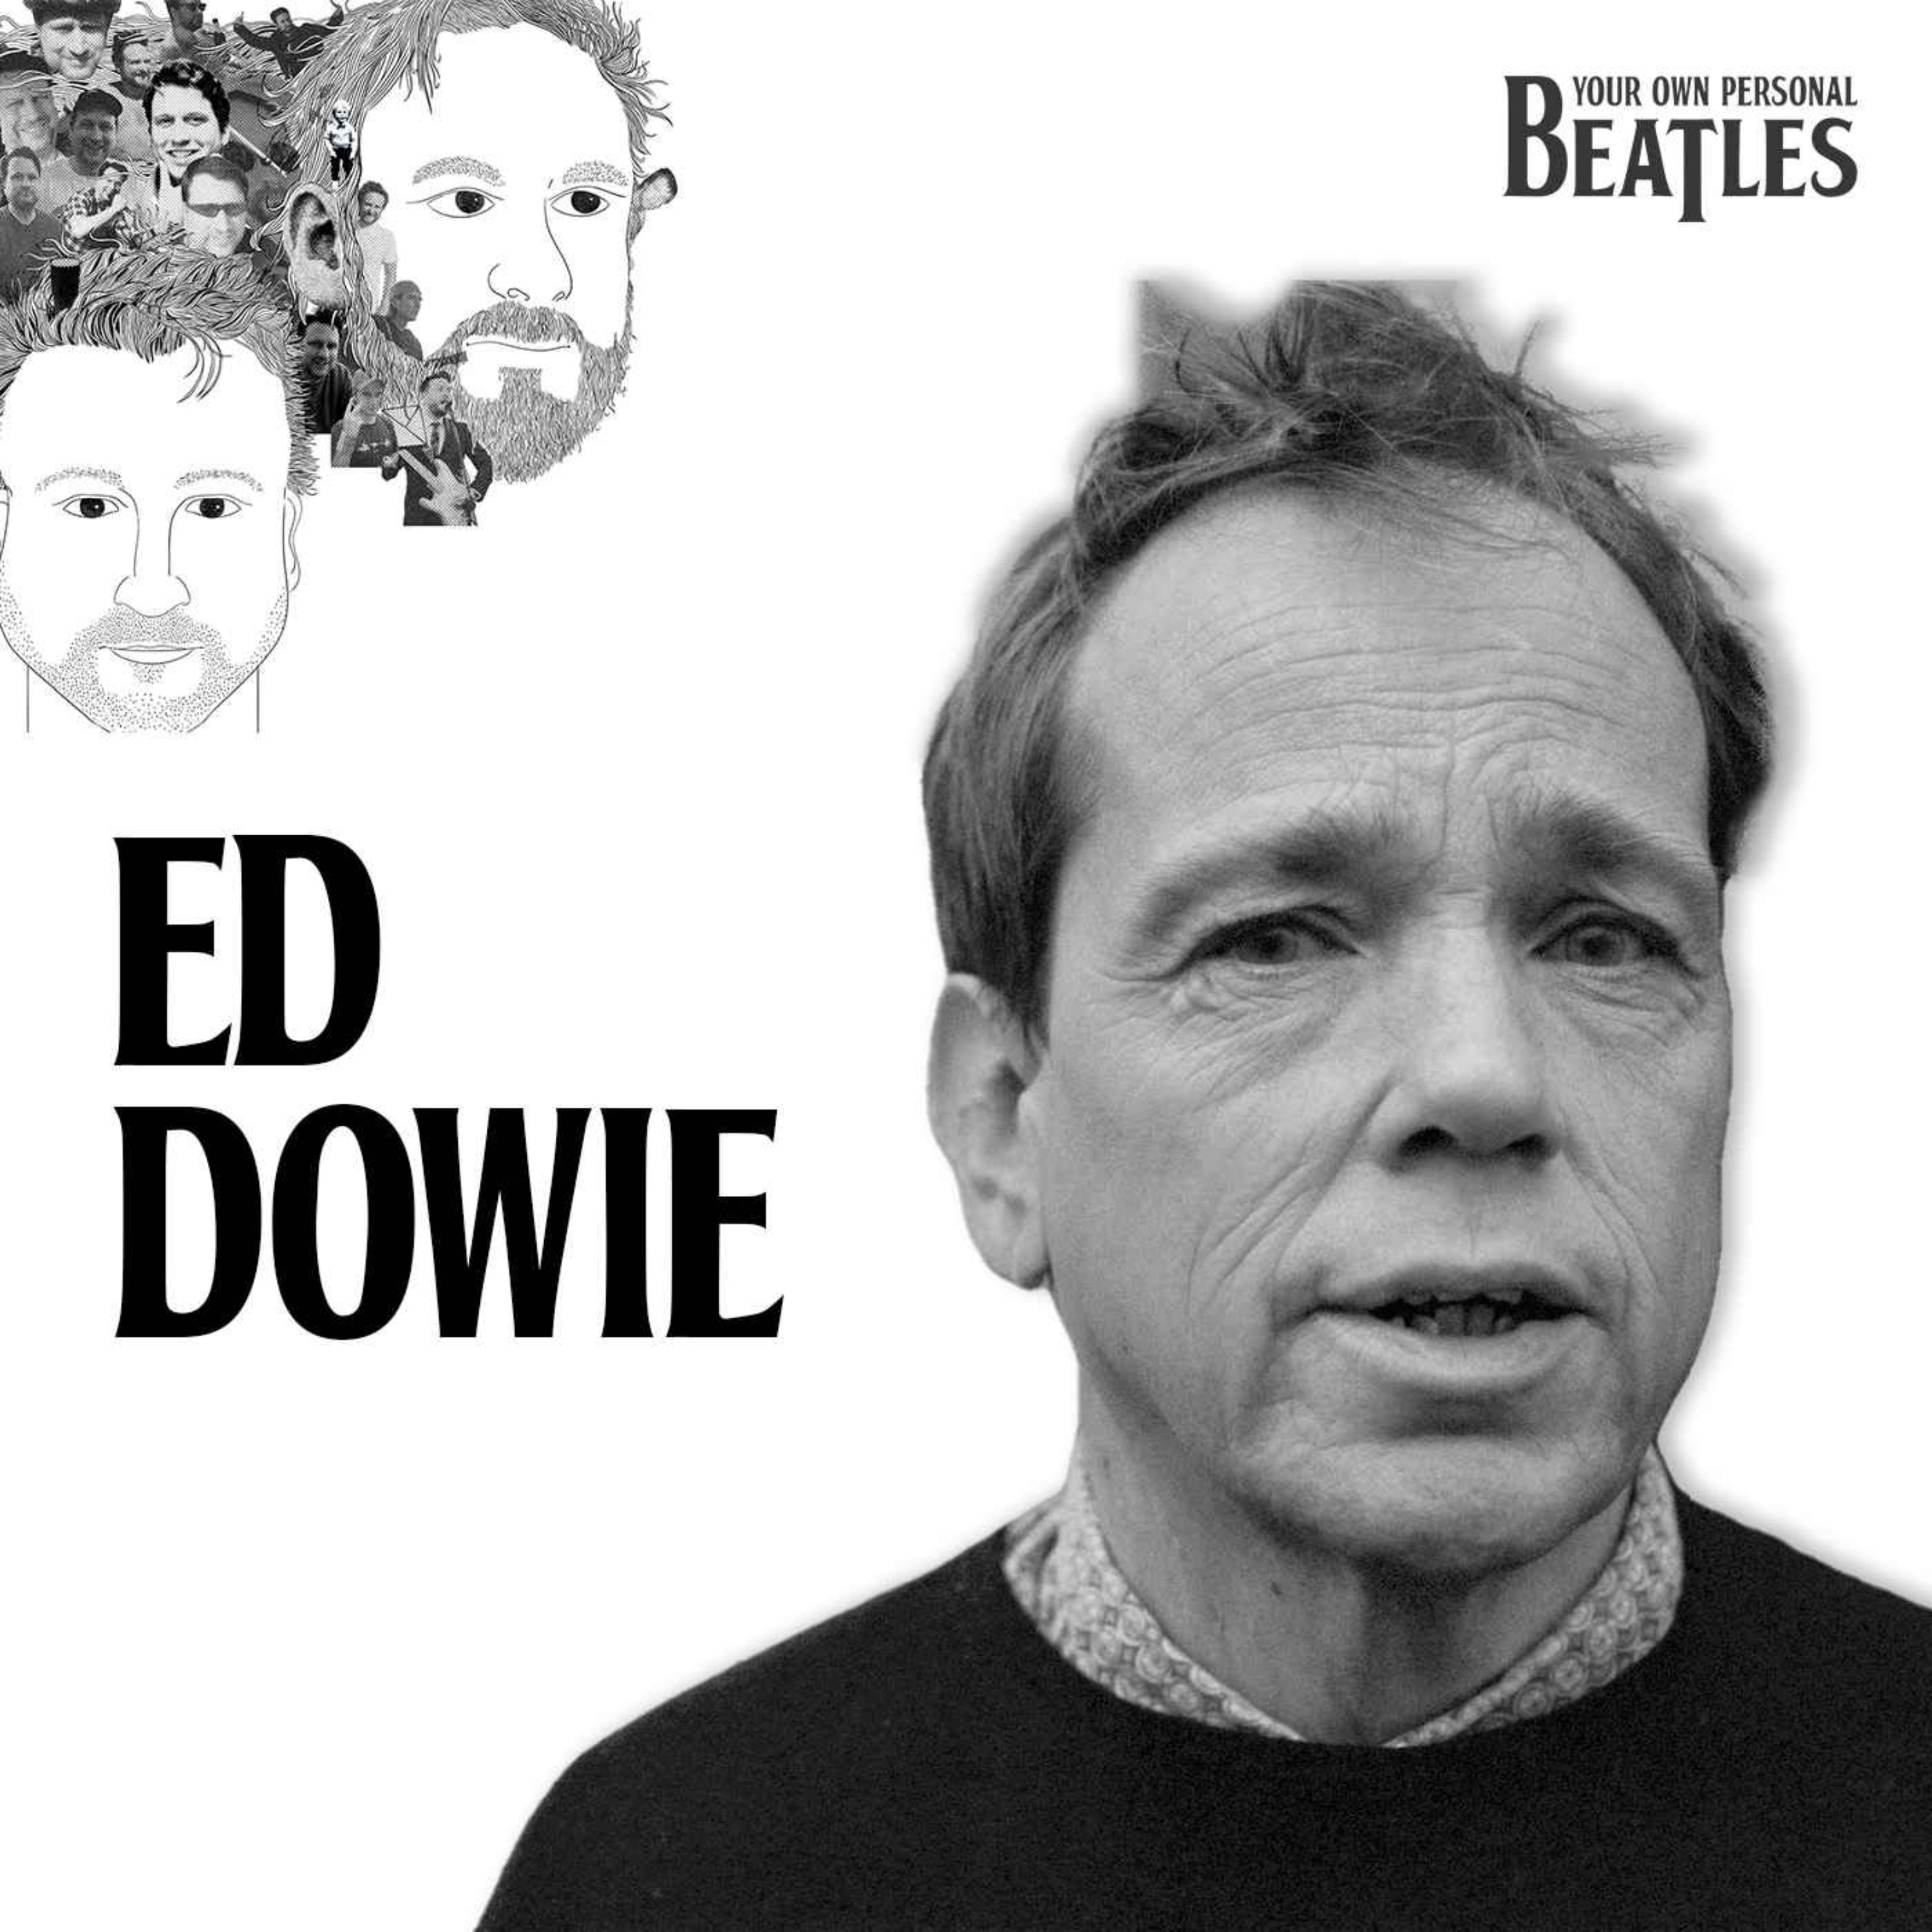 Ed Dowie’s Personal Beatles